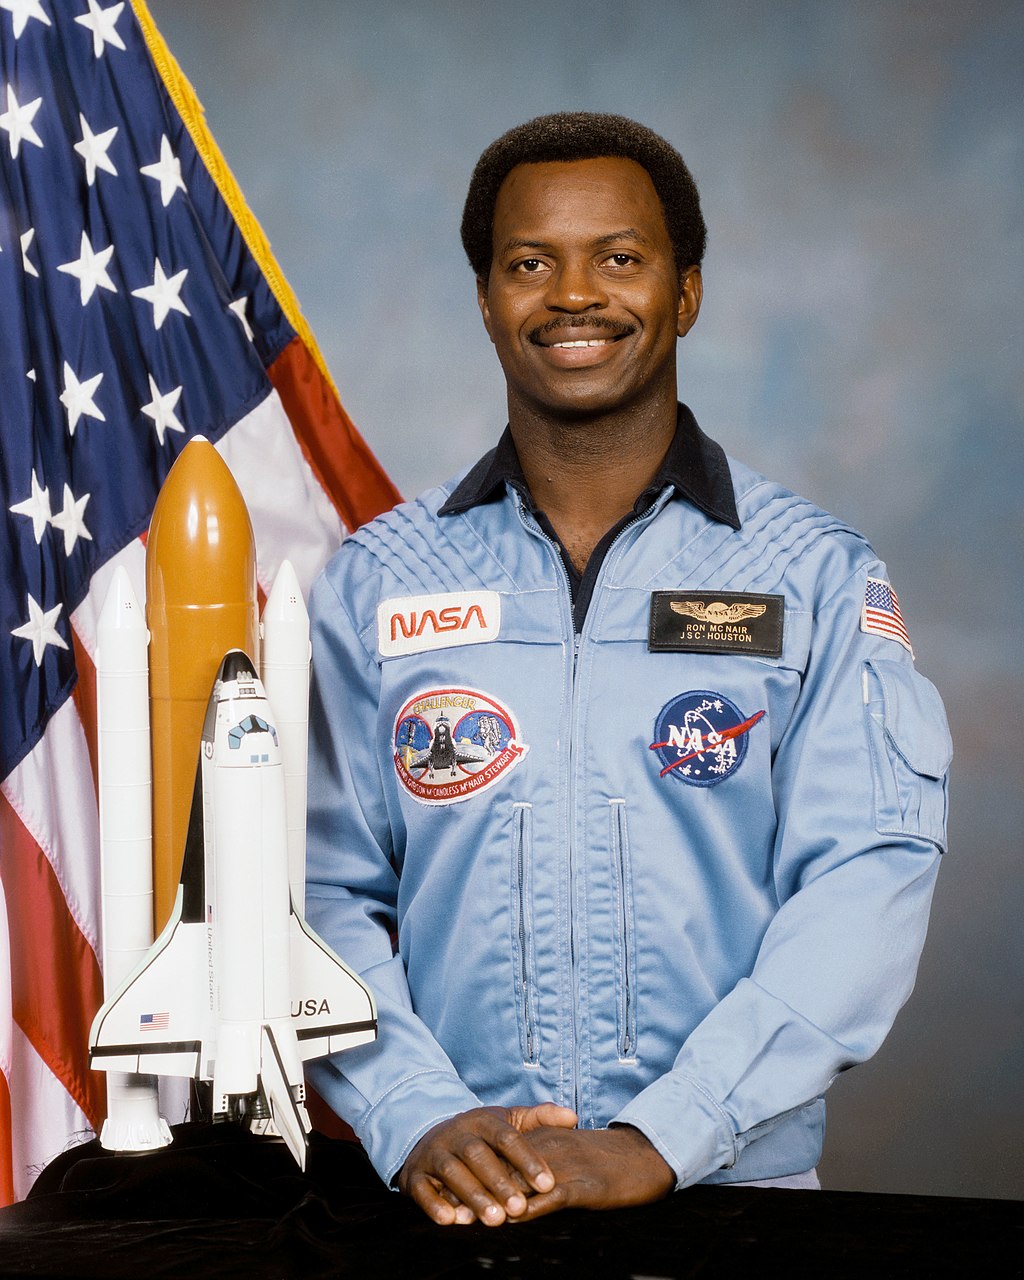 Photo of Ronald Erwin McNair standing next to a model space shuttle